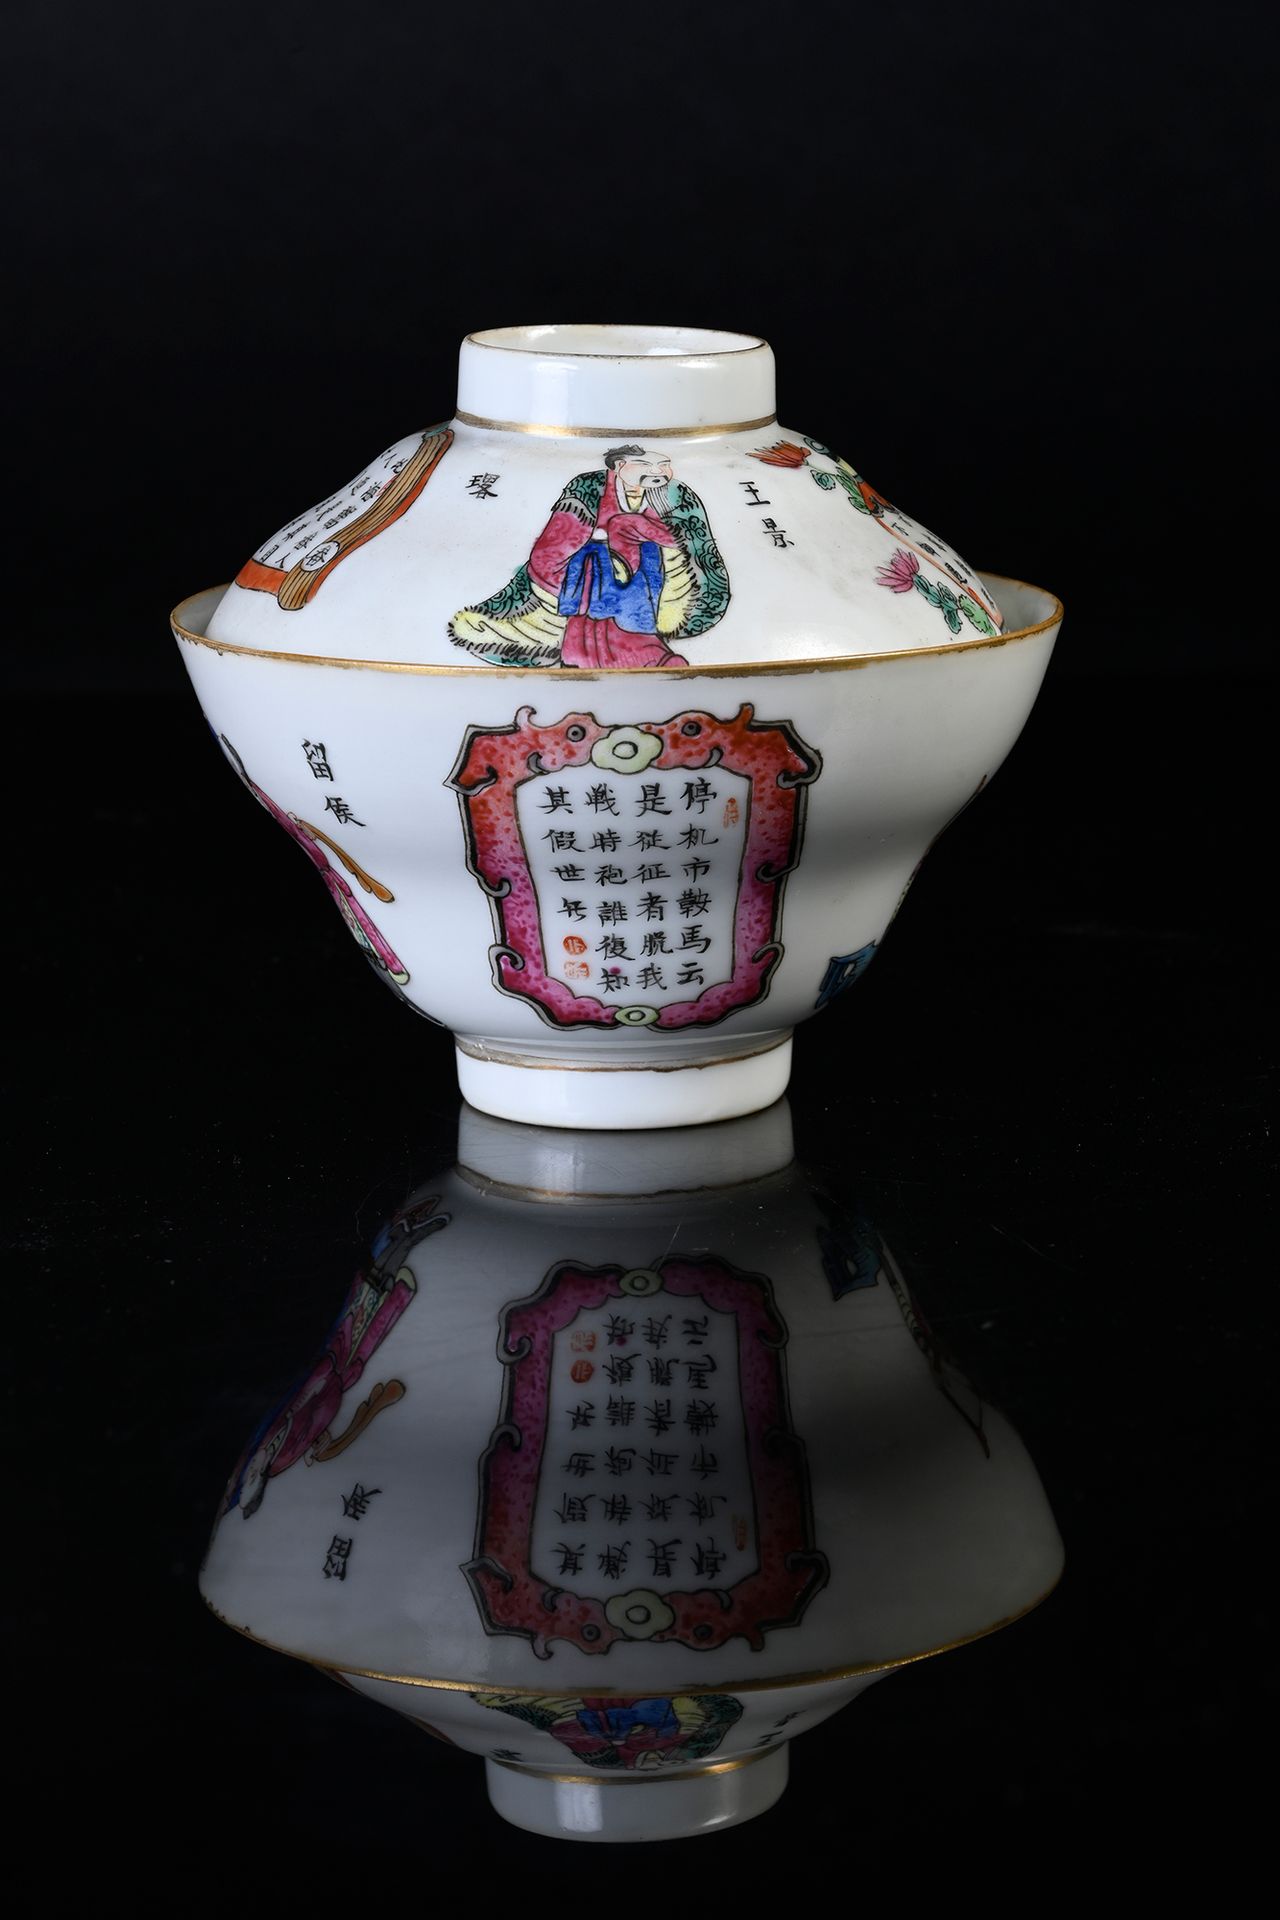 CHINE, XIXe siècle Small covered porcelain bowl
Decorated with polychrome enamel&hellip;